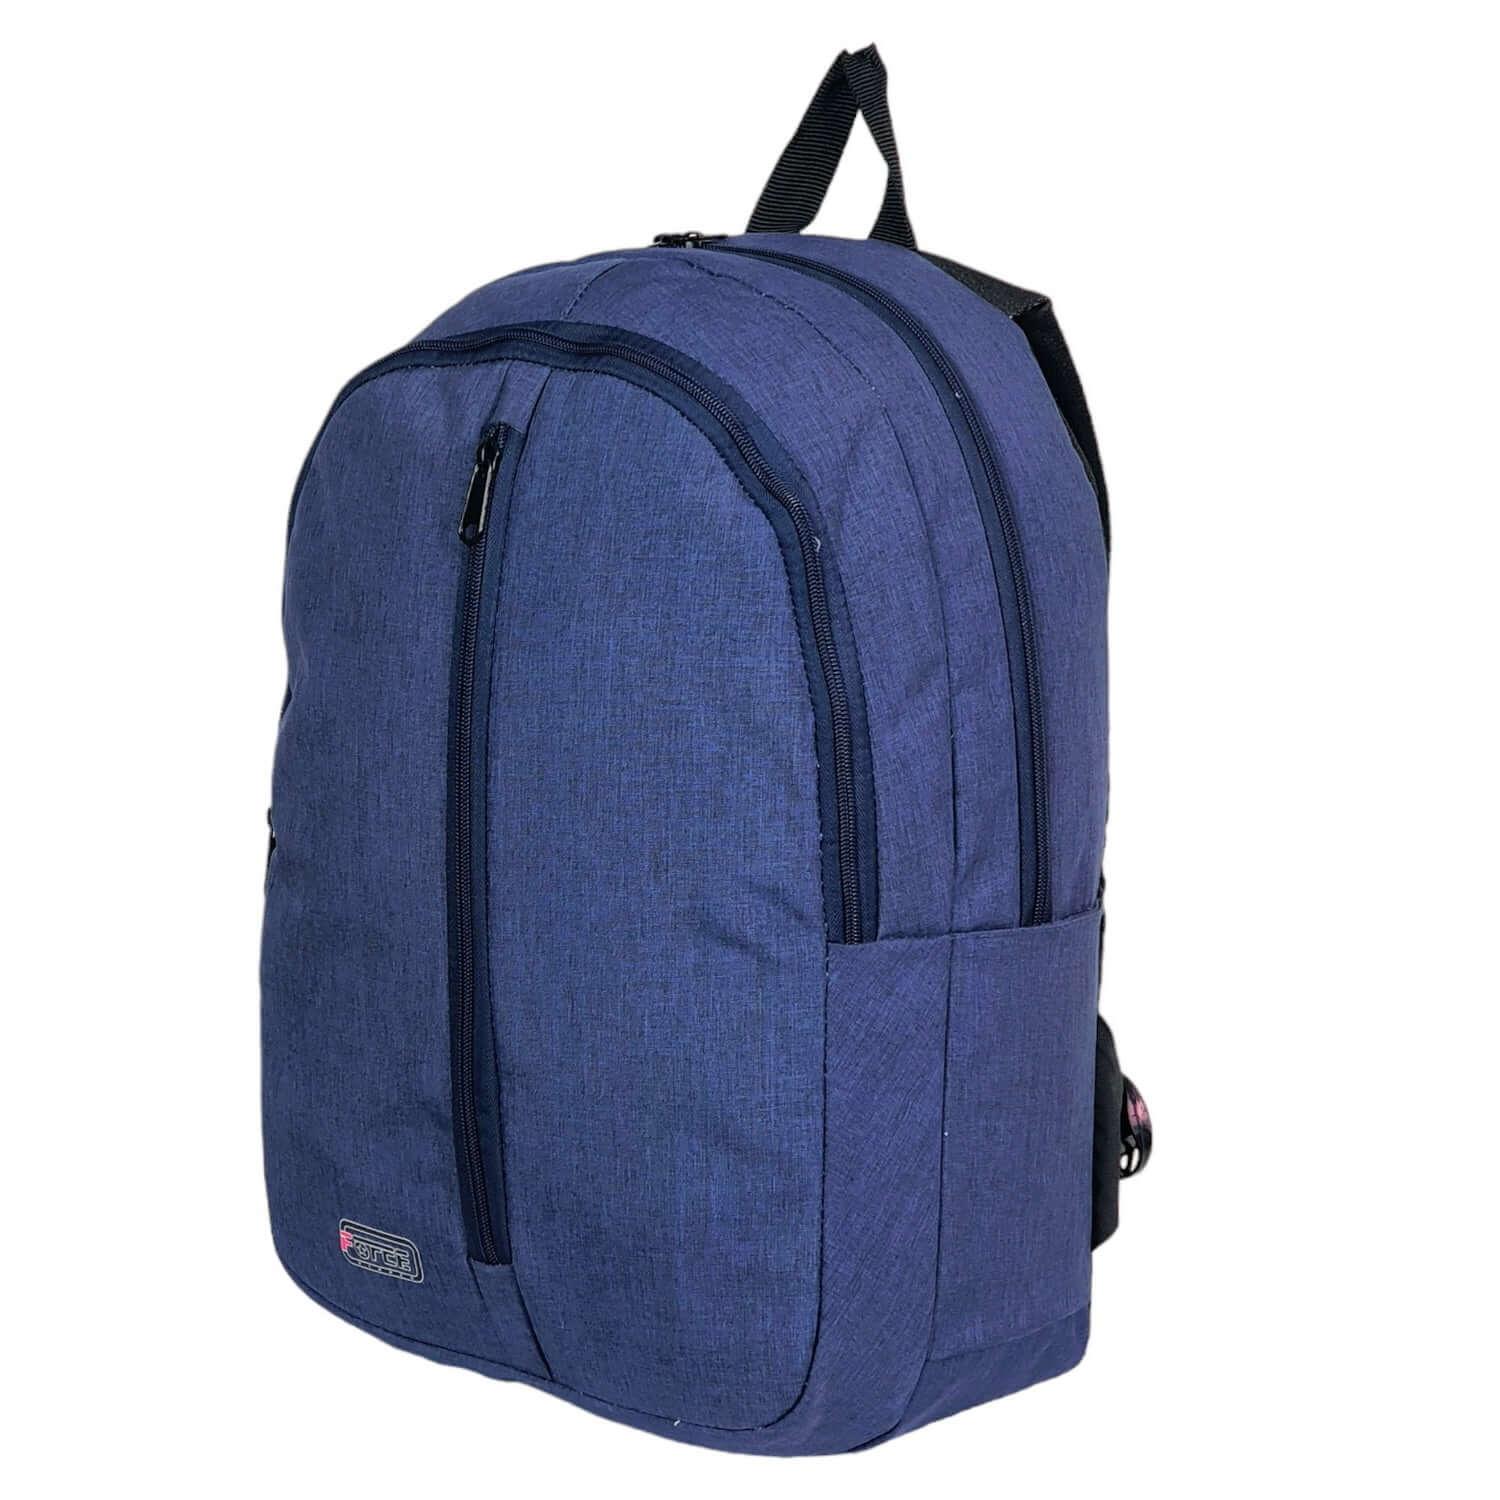 Force Basic Unisex Backpack Navy Blue FDB-20-46 - FORCE STORES